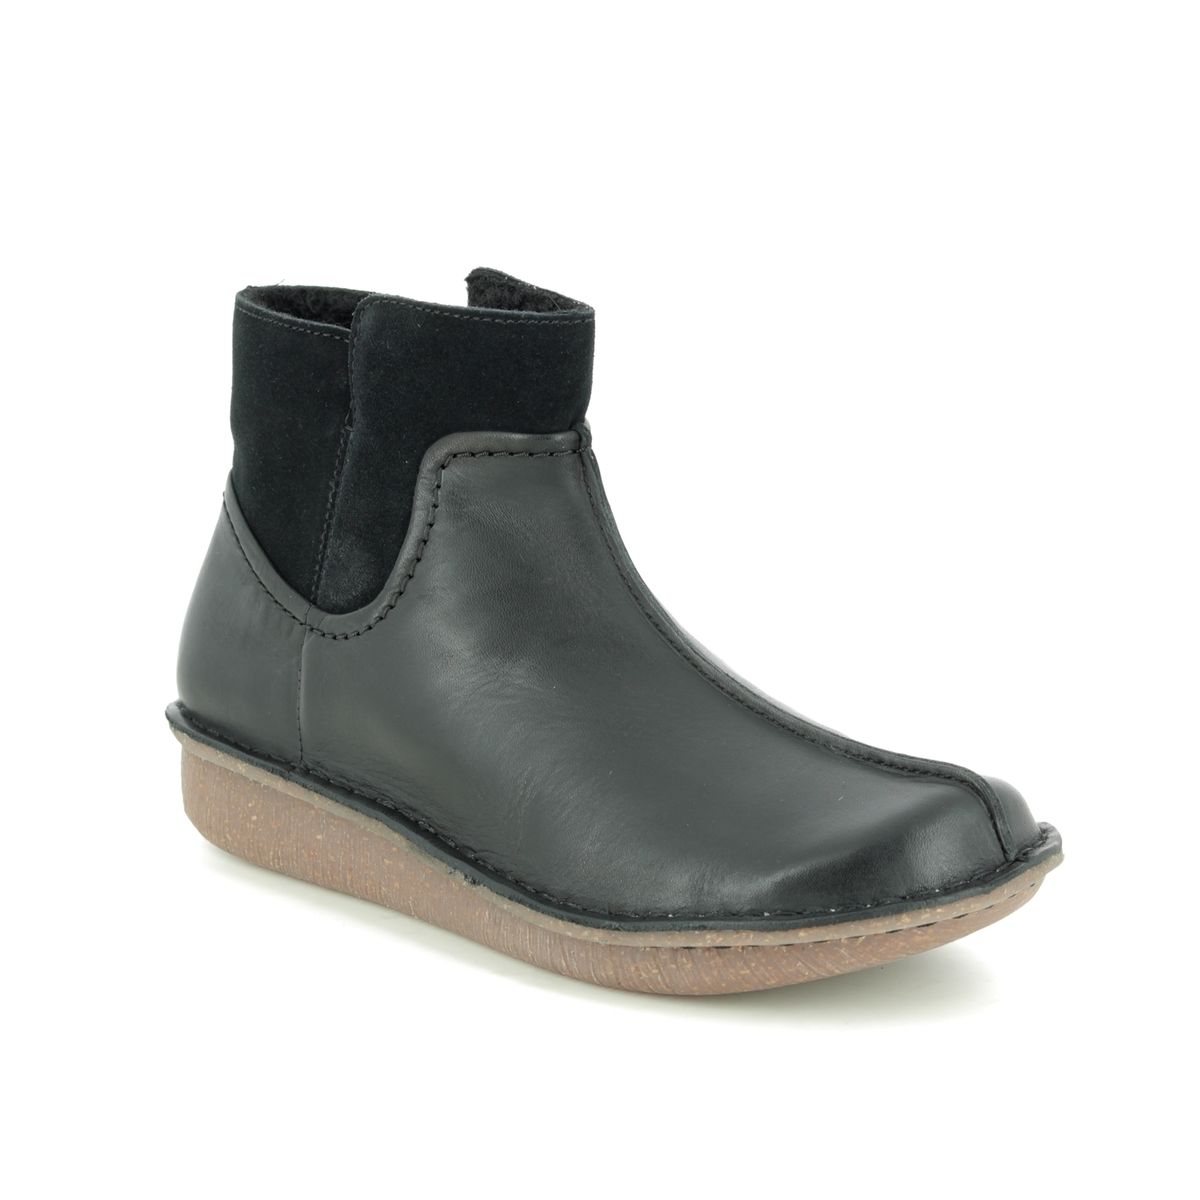 clarks ankle boots leather